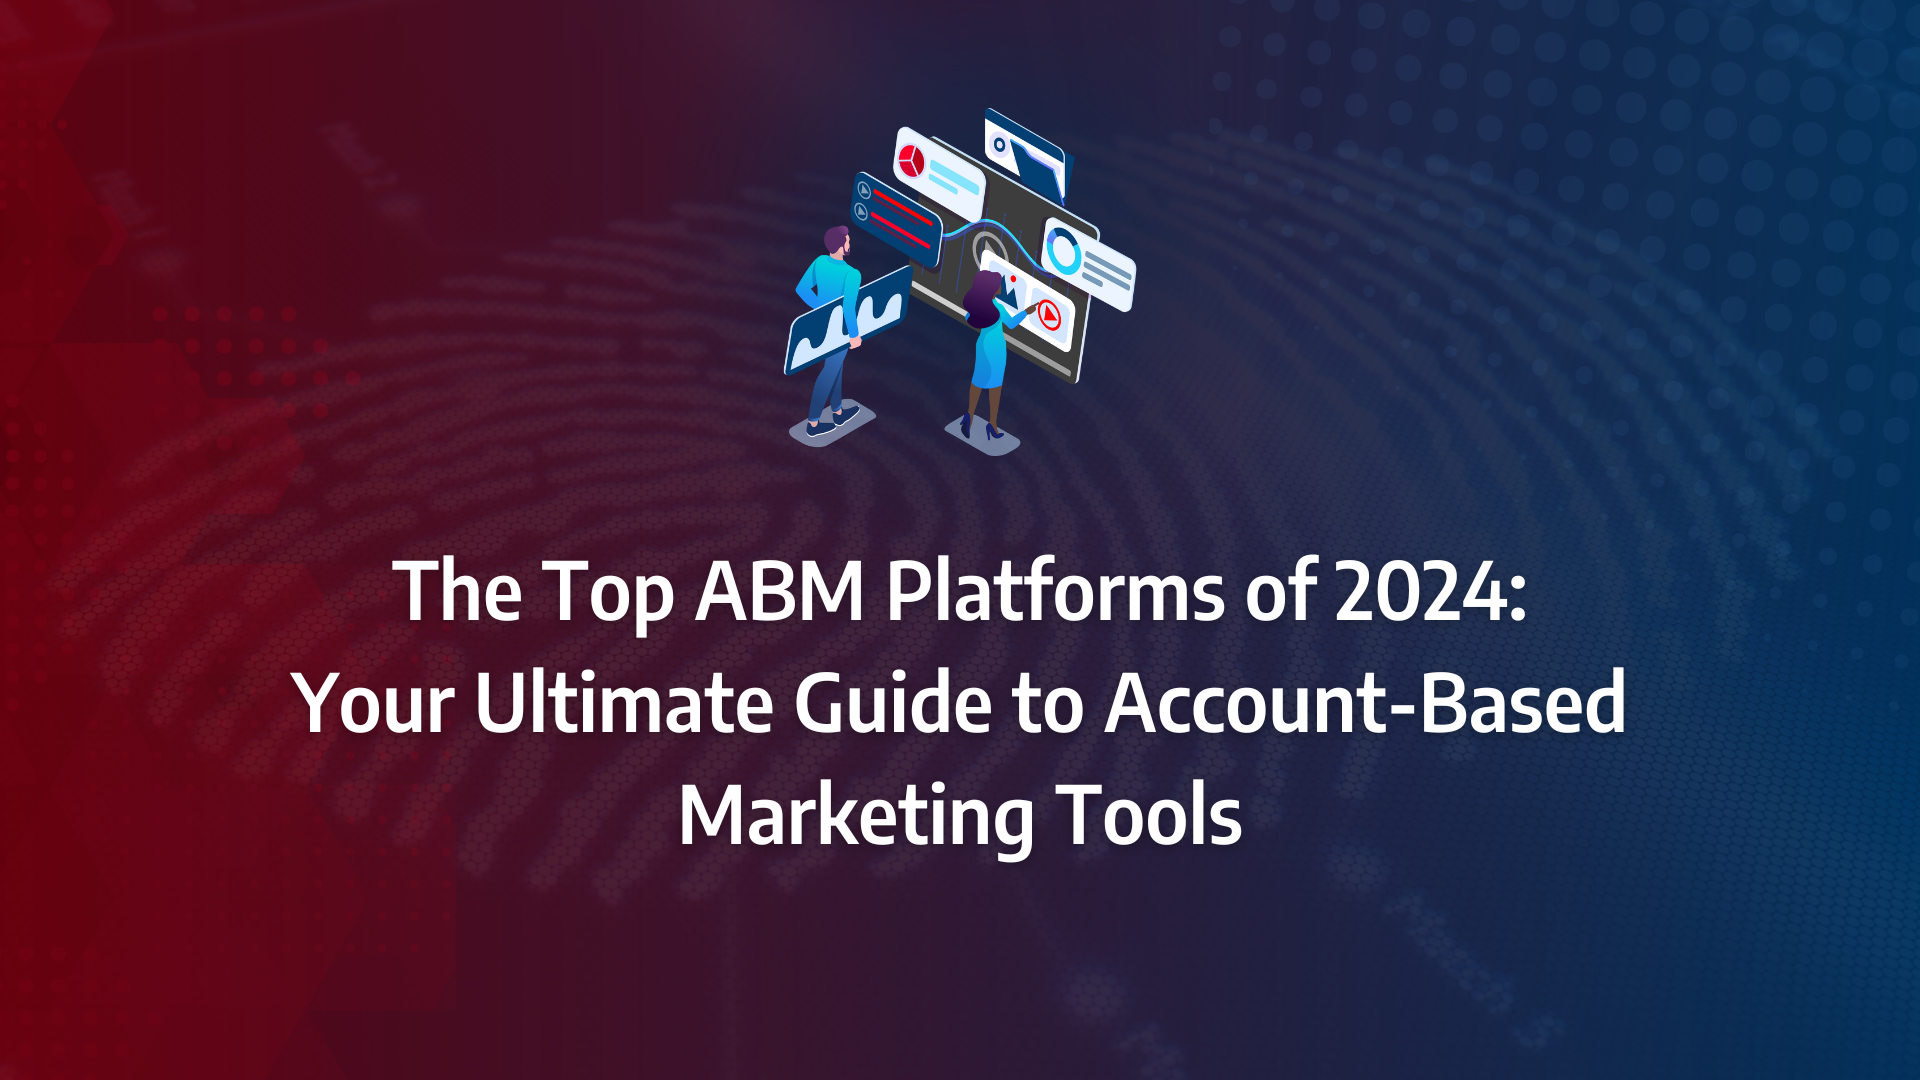 the ultimate guide to abm platforms incorporating abm tools, abm software, marketing automation, abm analytics, sales intelligence